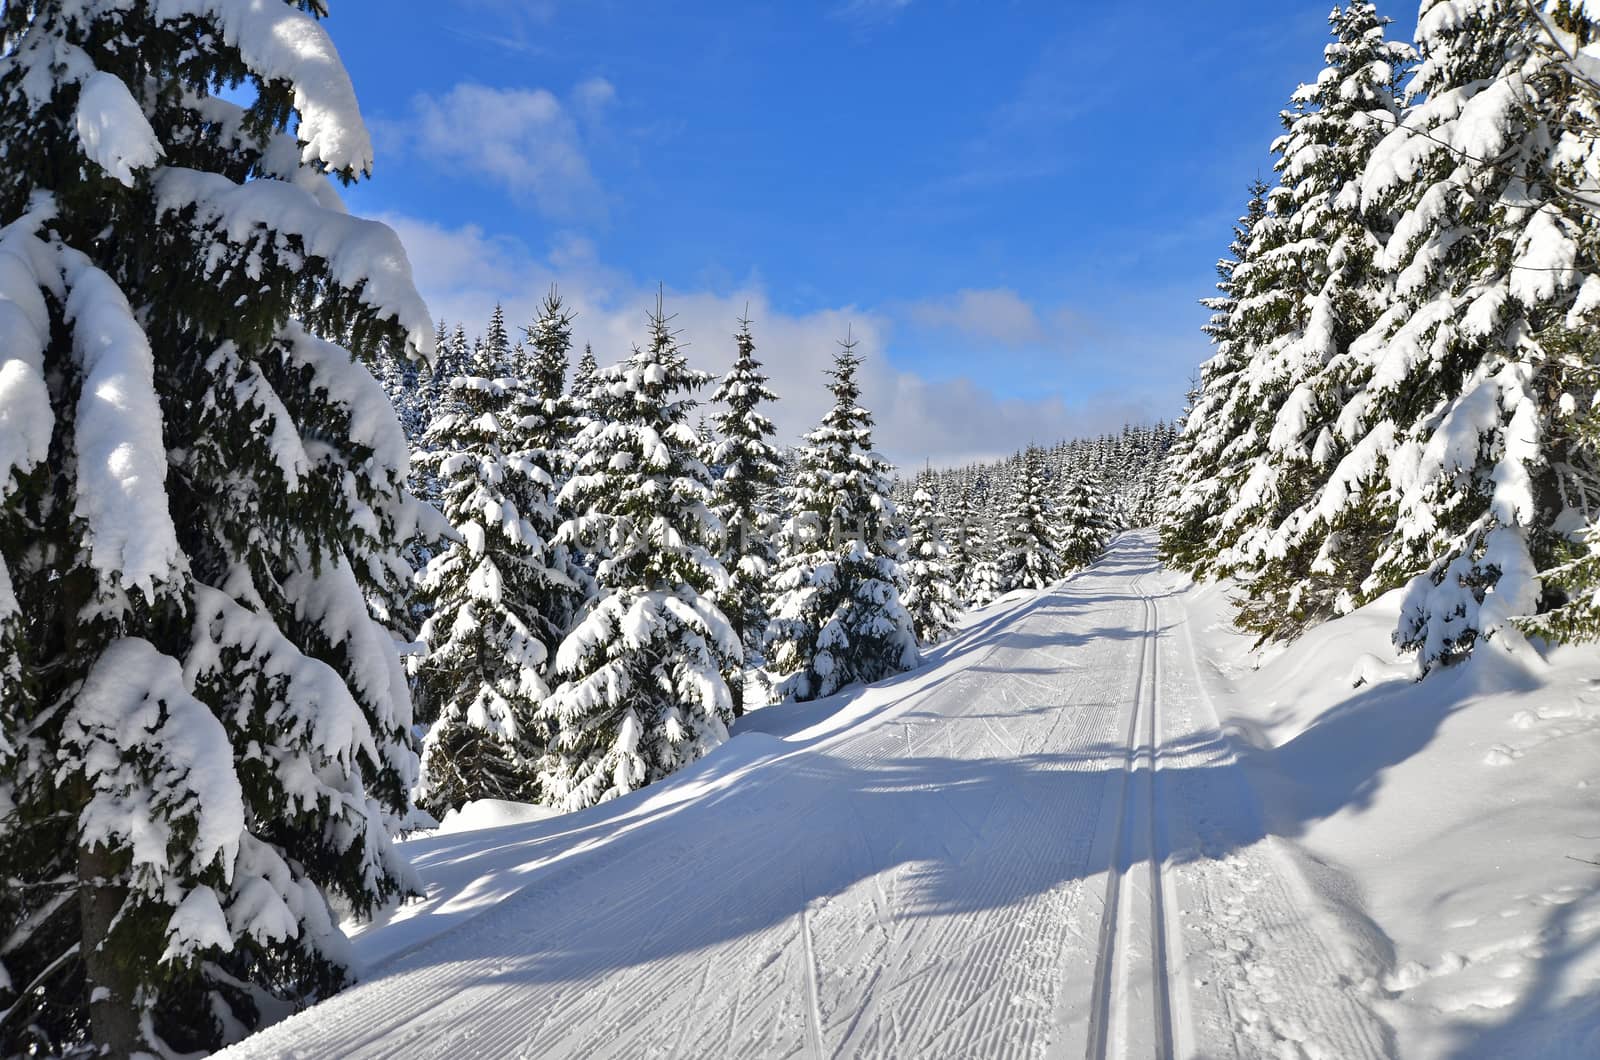 
fresh track for cross-country skiing by studio023